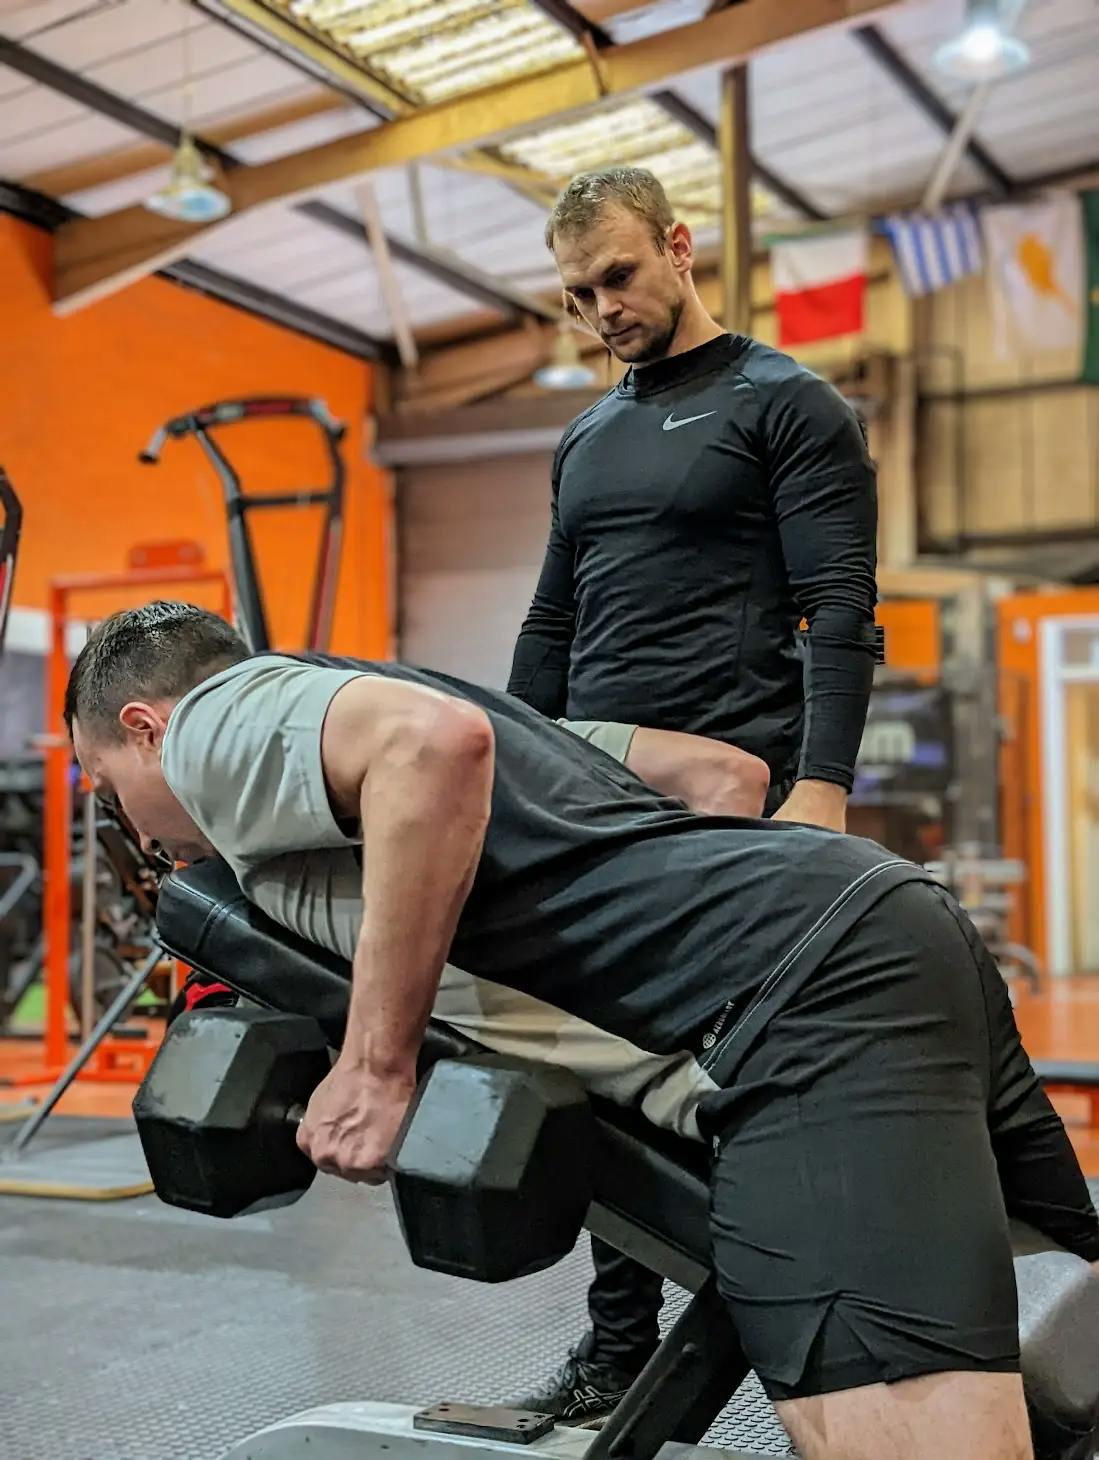 Chris watching a client perform a dumbbell row on a raised bench